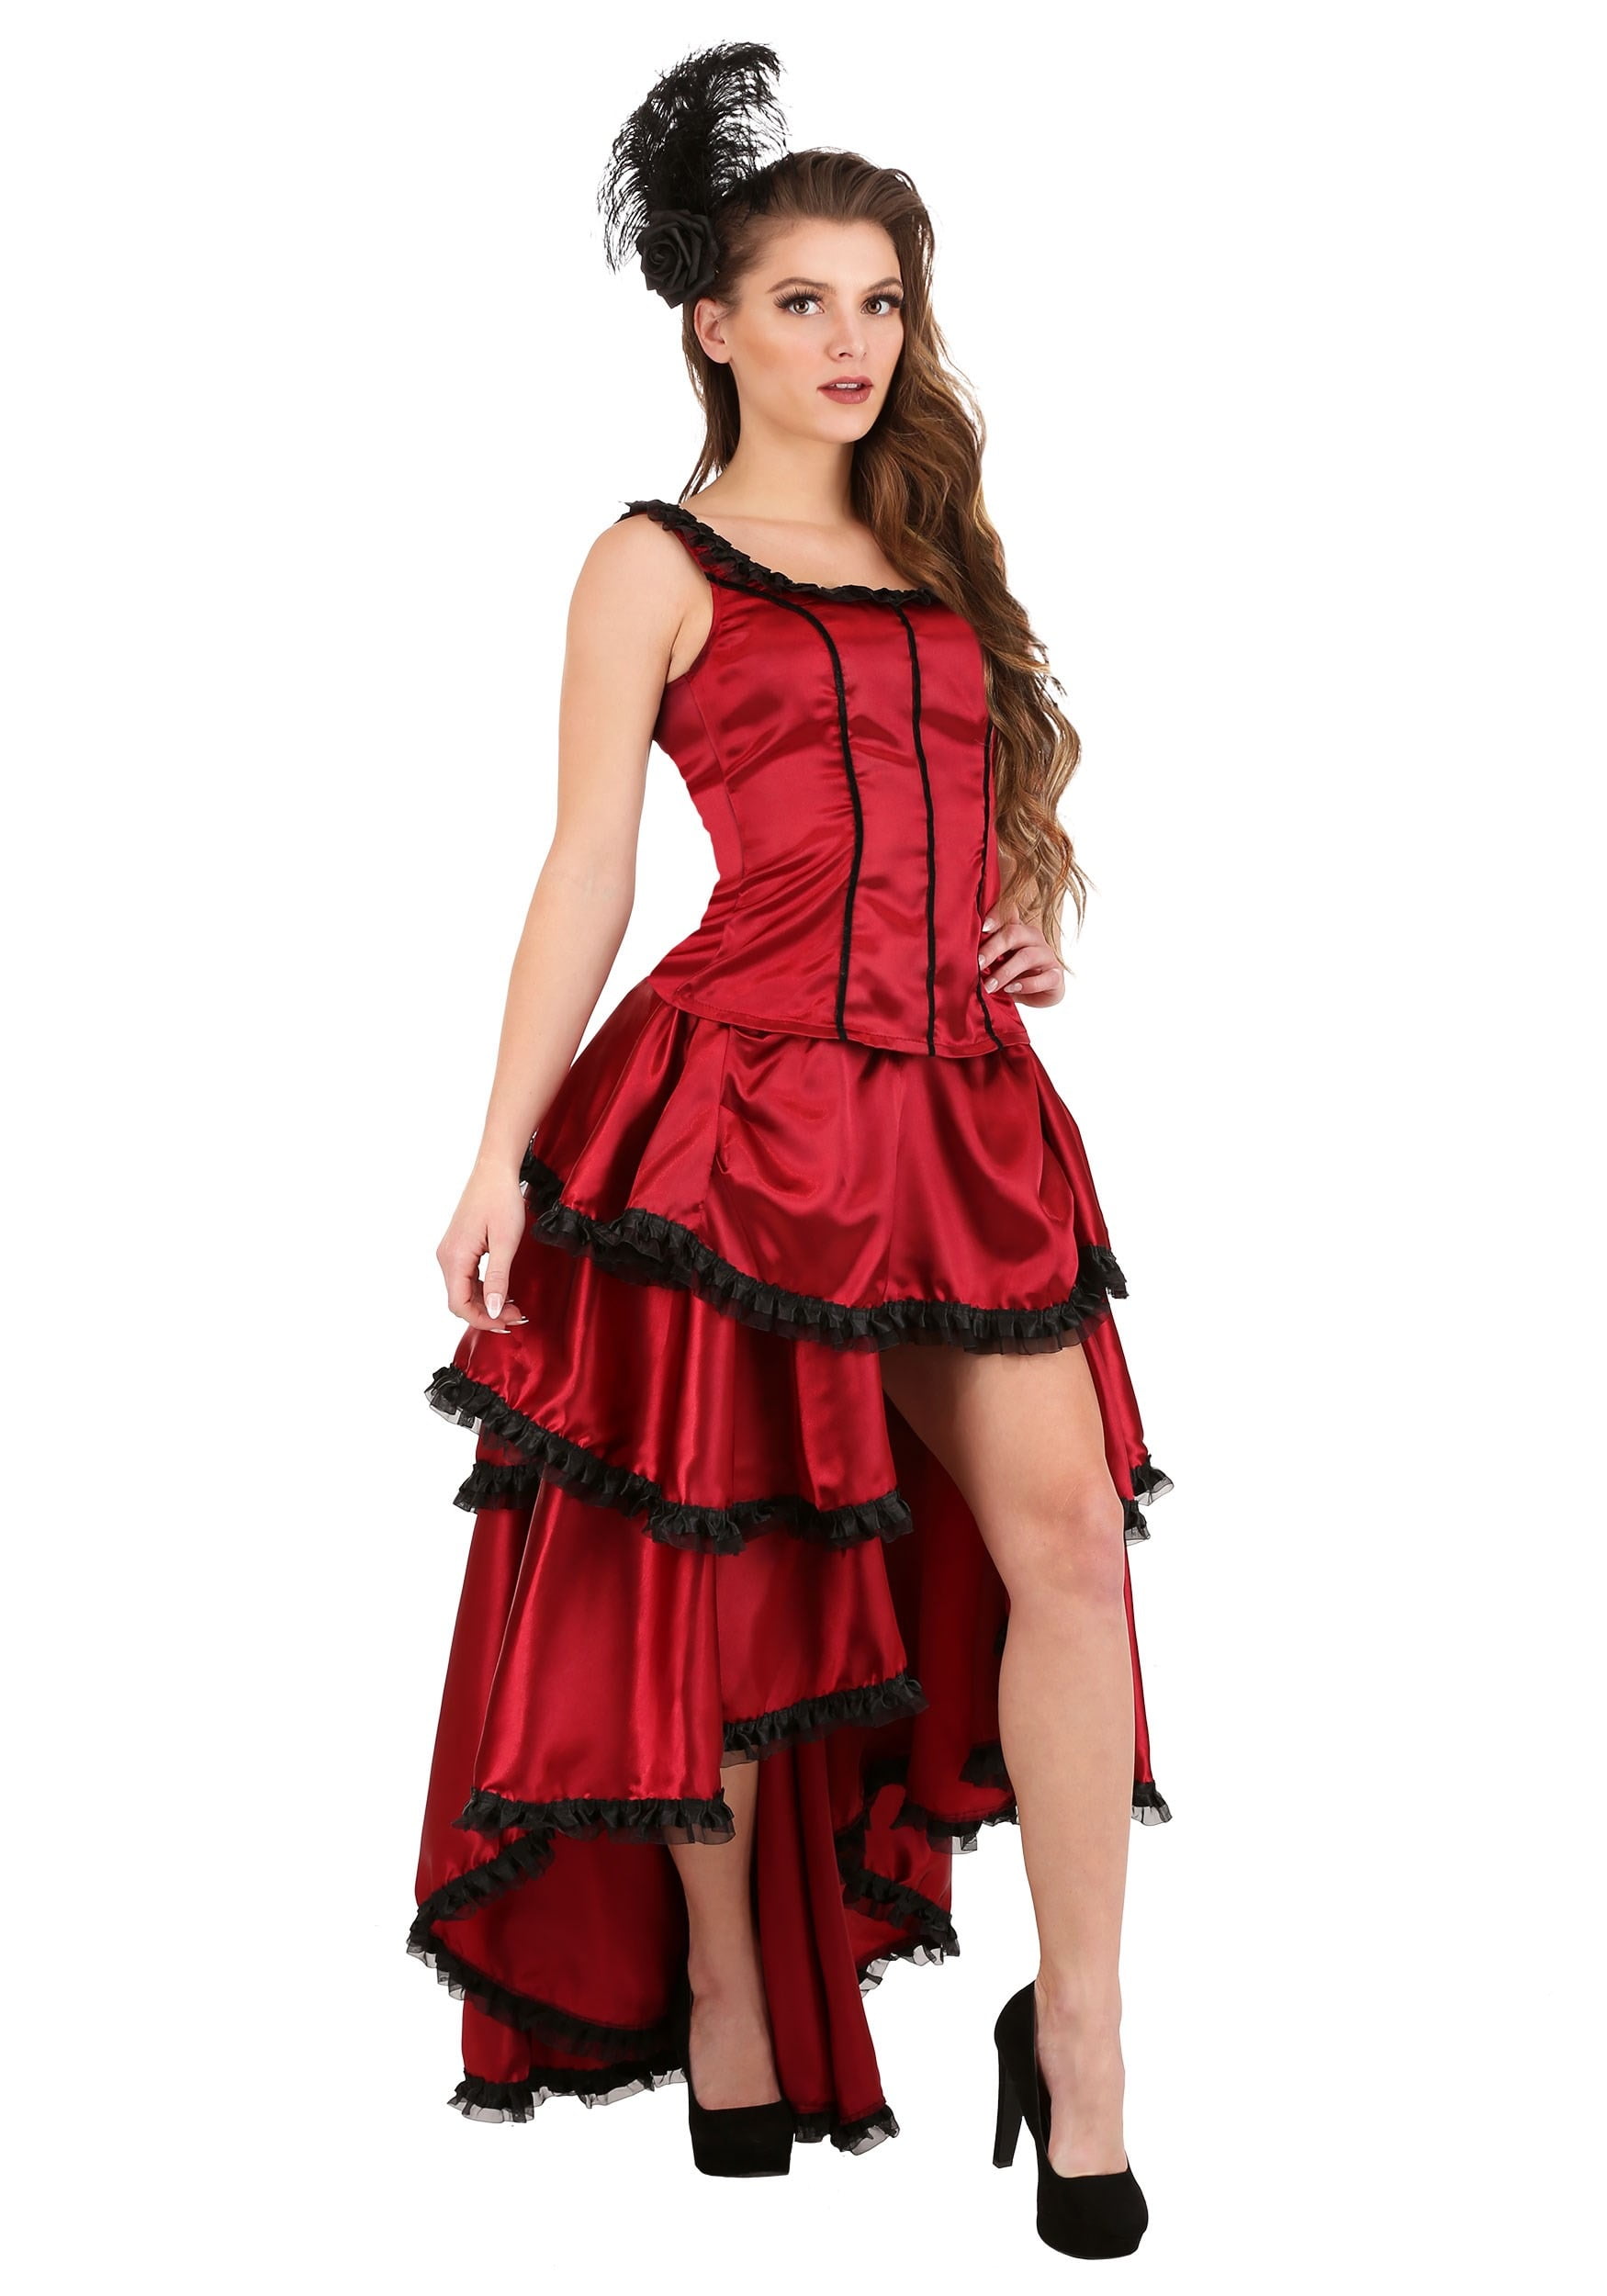 Saloon Girl Costume Adult Wild West Madame Can Can Dancer Halloween Fancy Dress